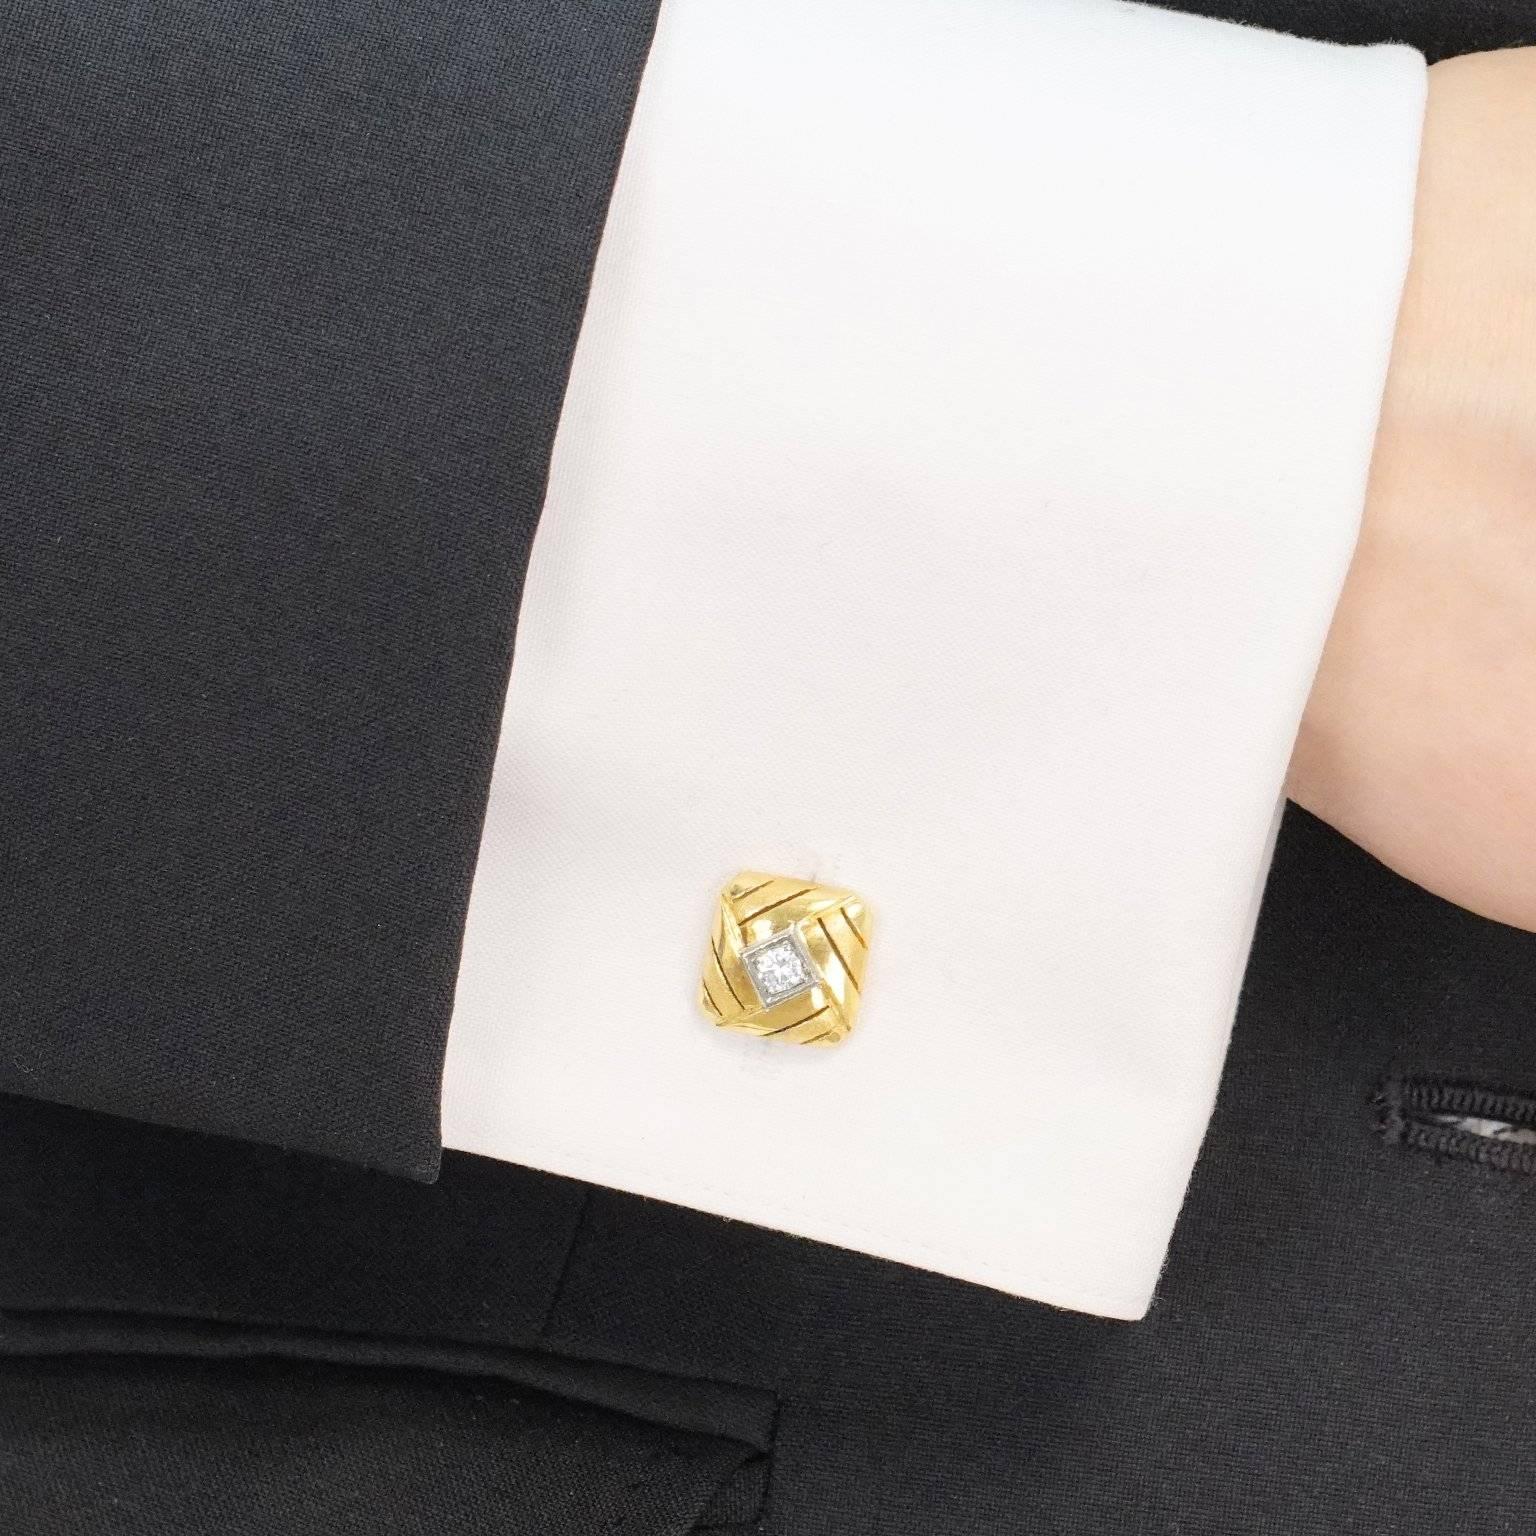 Circa 1960s, 14k.  This pair of cufflinks will add an understated dash of elegance to any suit or sport jacket. Styled in a textured woven motif, the design is centered by a diamond in a white gold frame. Meticulously made, they are in excellent